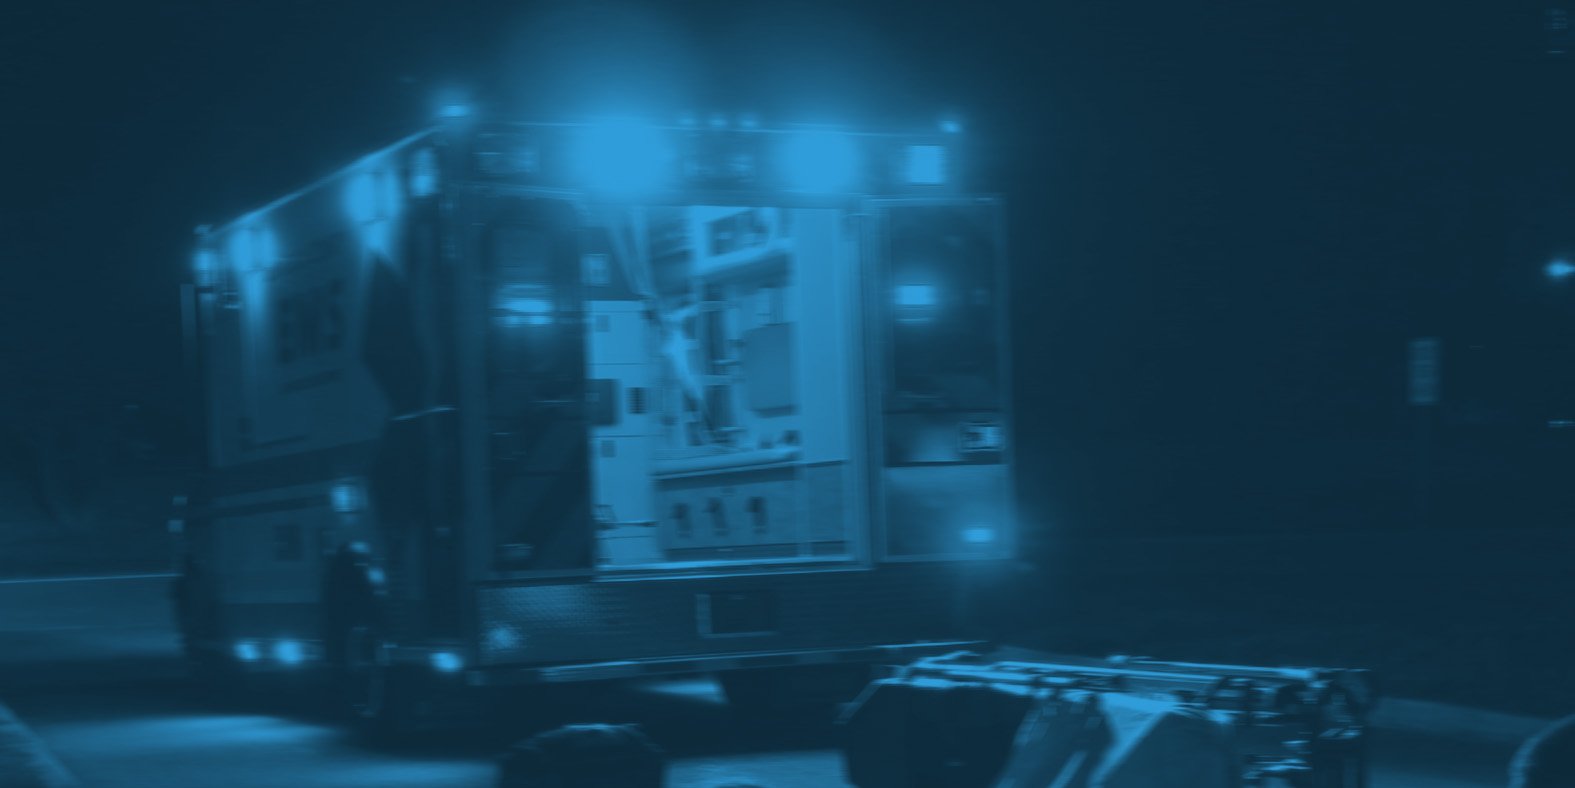 EMTs role in responding to opioid crisis